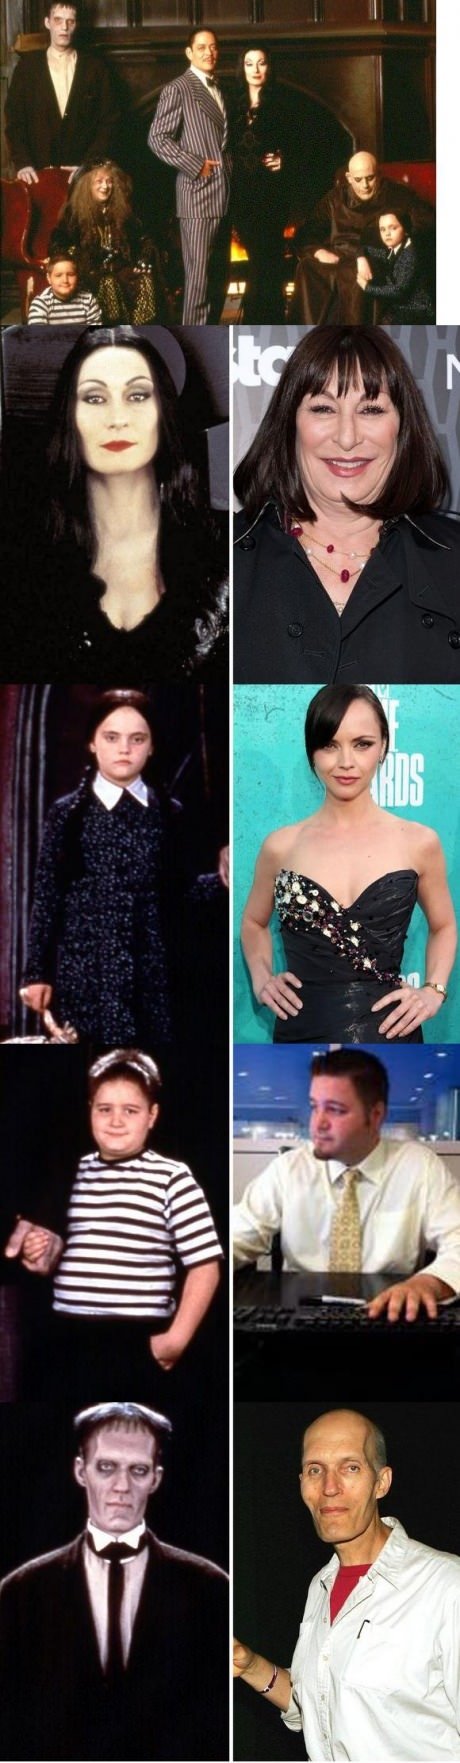 Addams Family after 21 years.